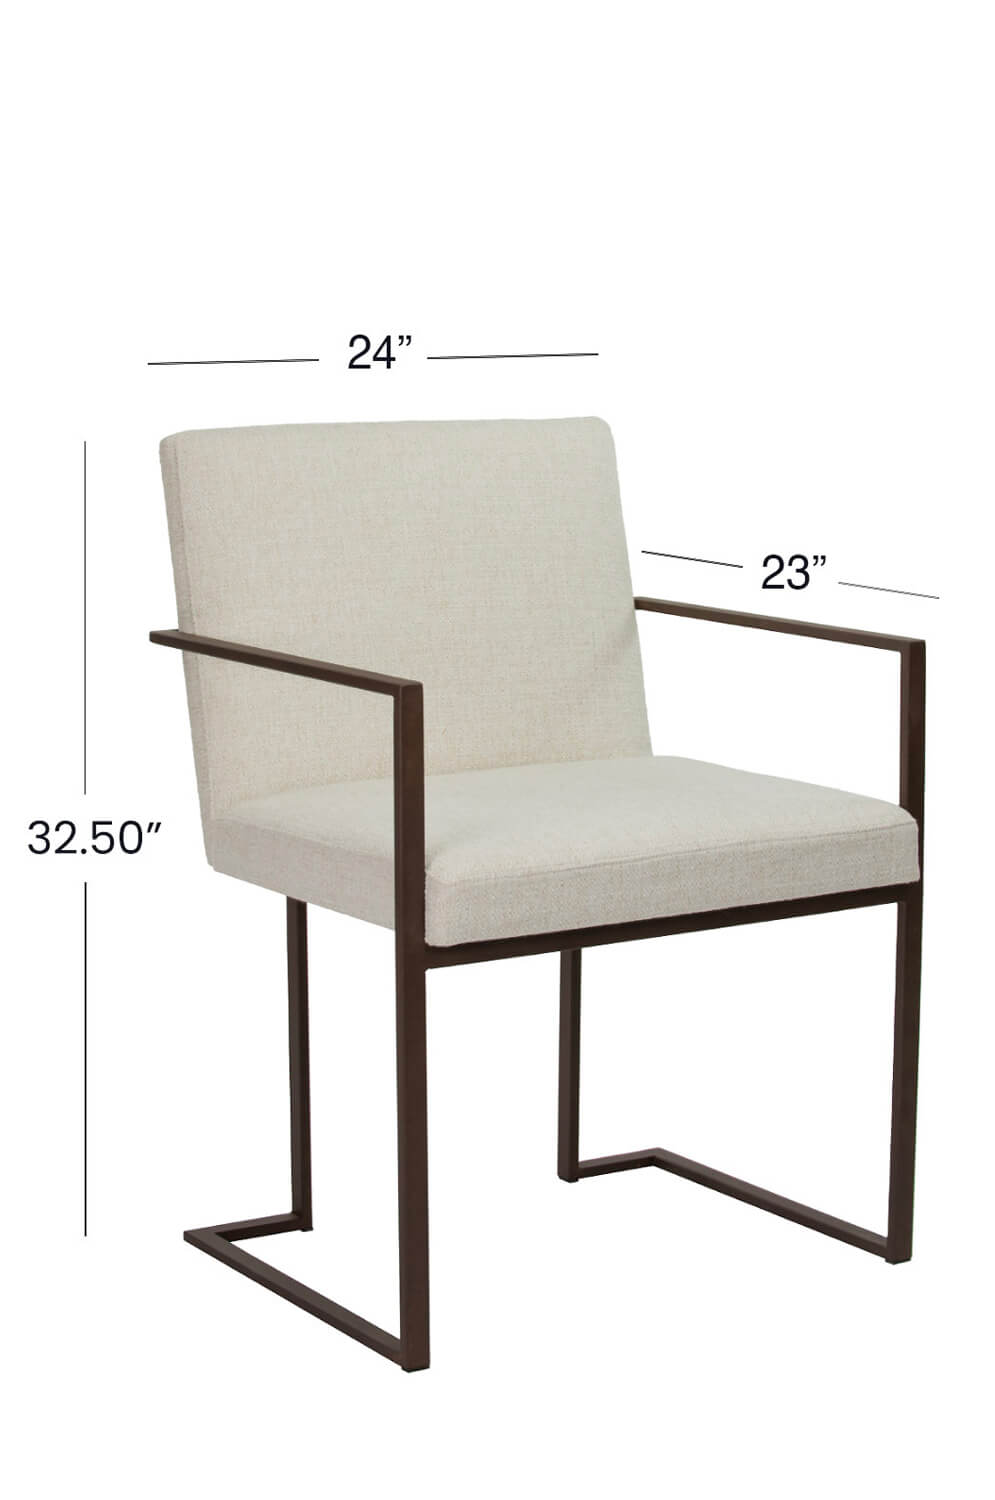 Marzan Modern Upholstered Dining Chair